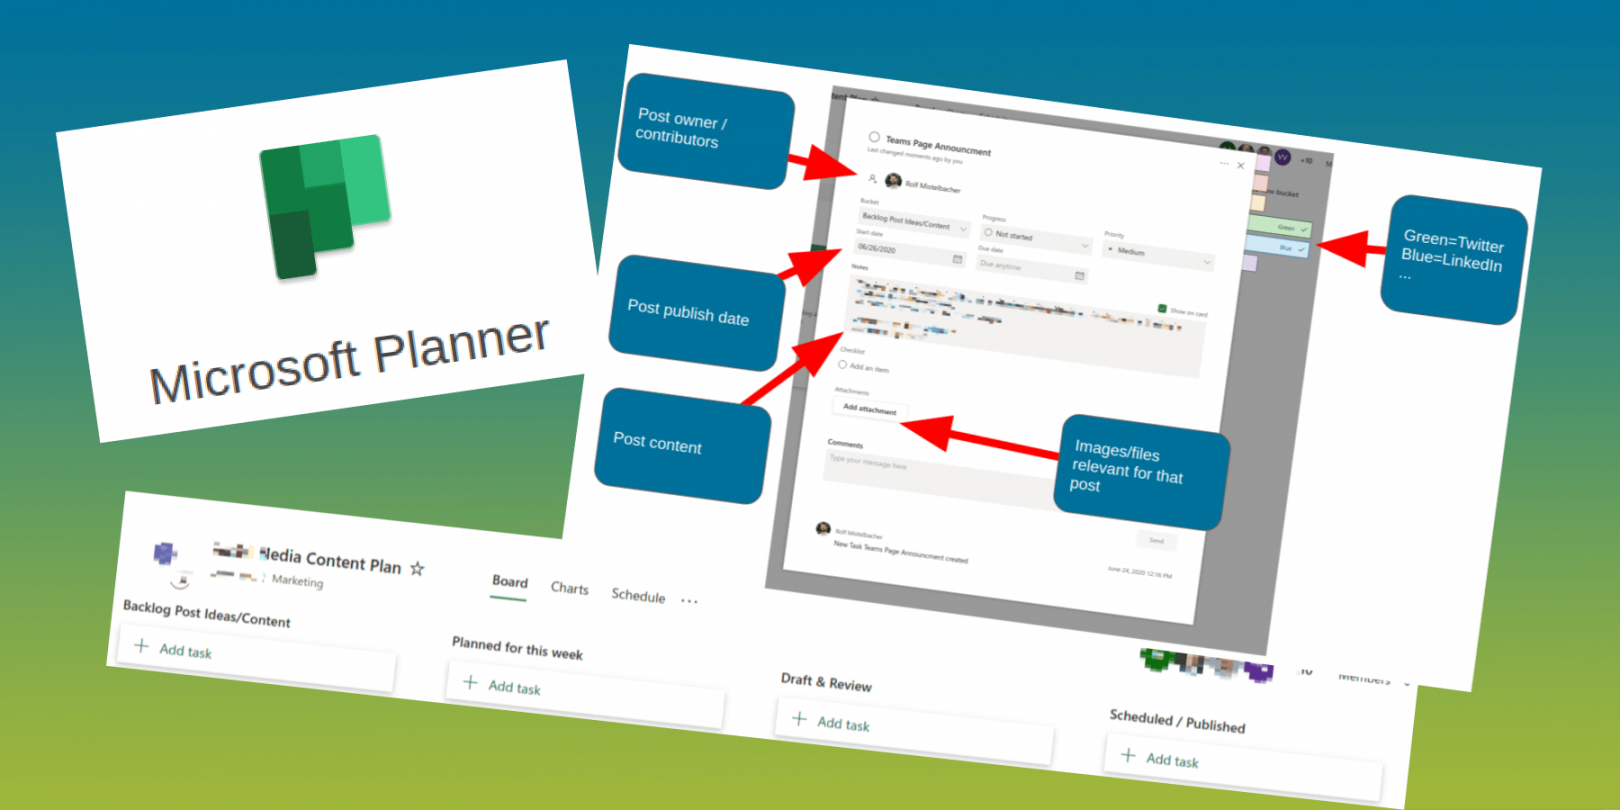 How To Use Microsoft Planner For Social Media Content Planning